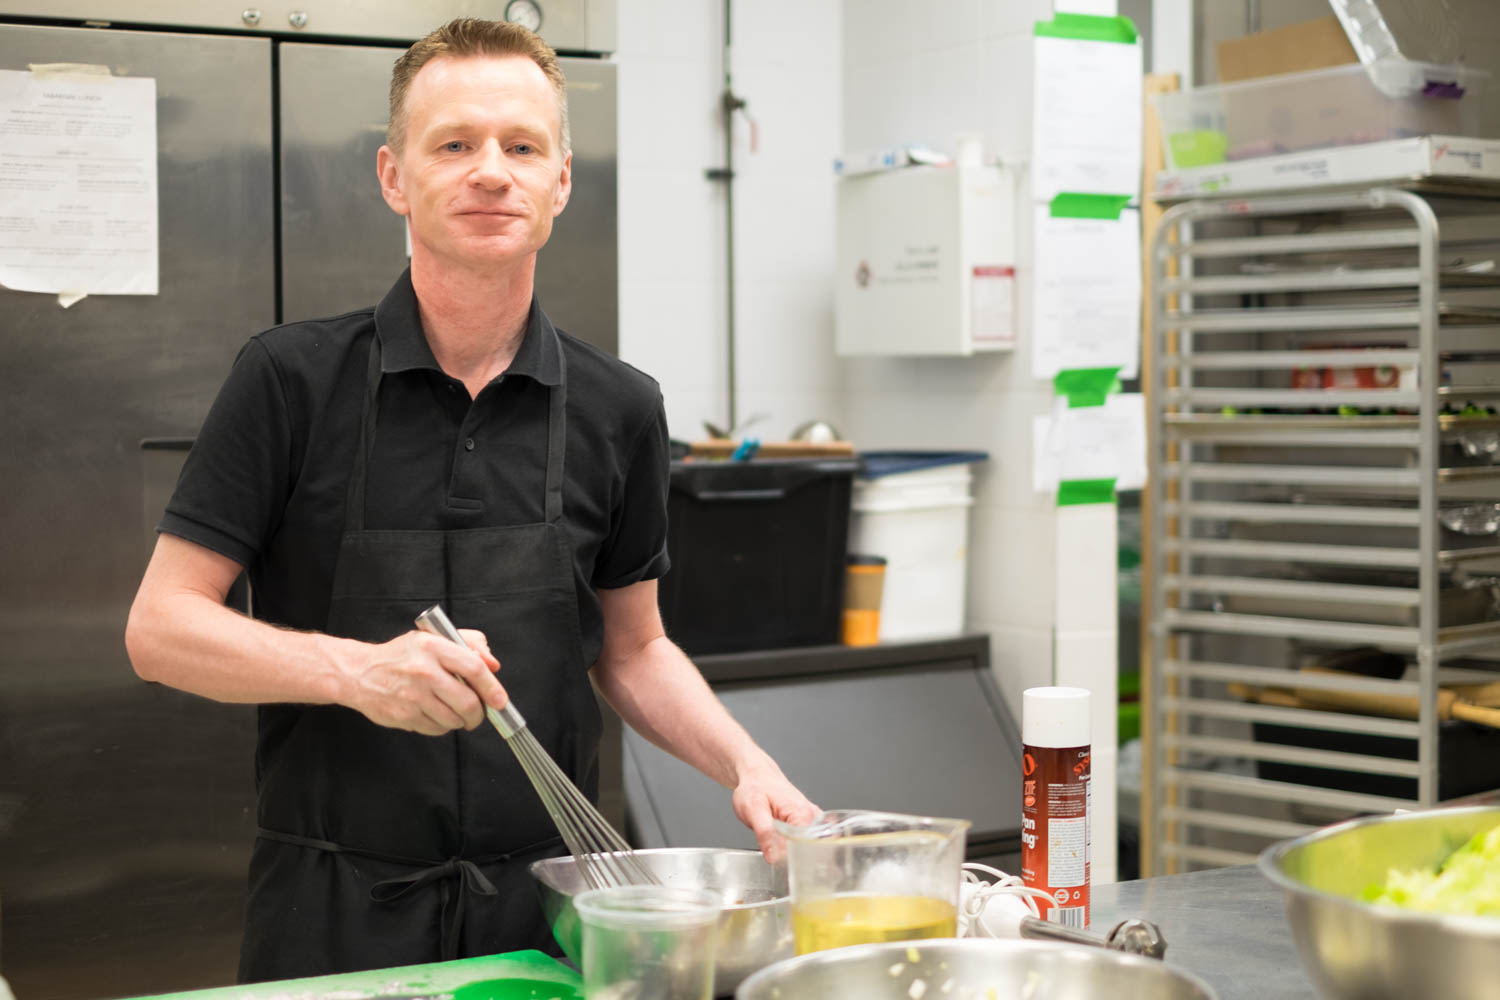 Stephen wearing a black shirt and apron whisking in a kitchen with kitchen equipment in the background. Stephen is looking at the camera and smiling. 